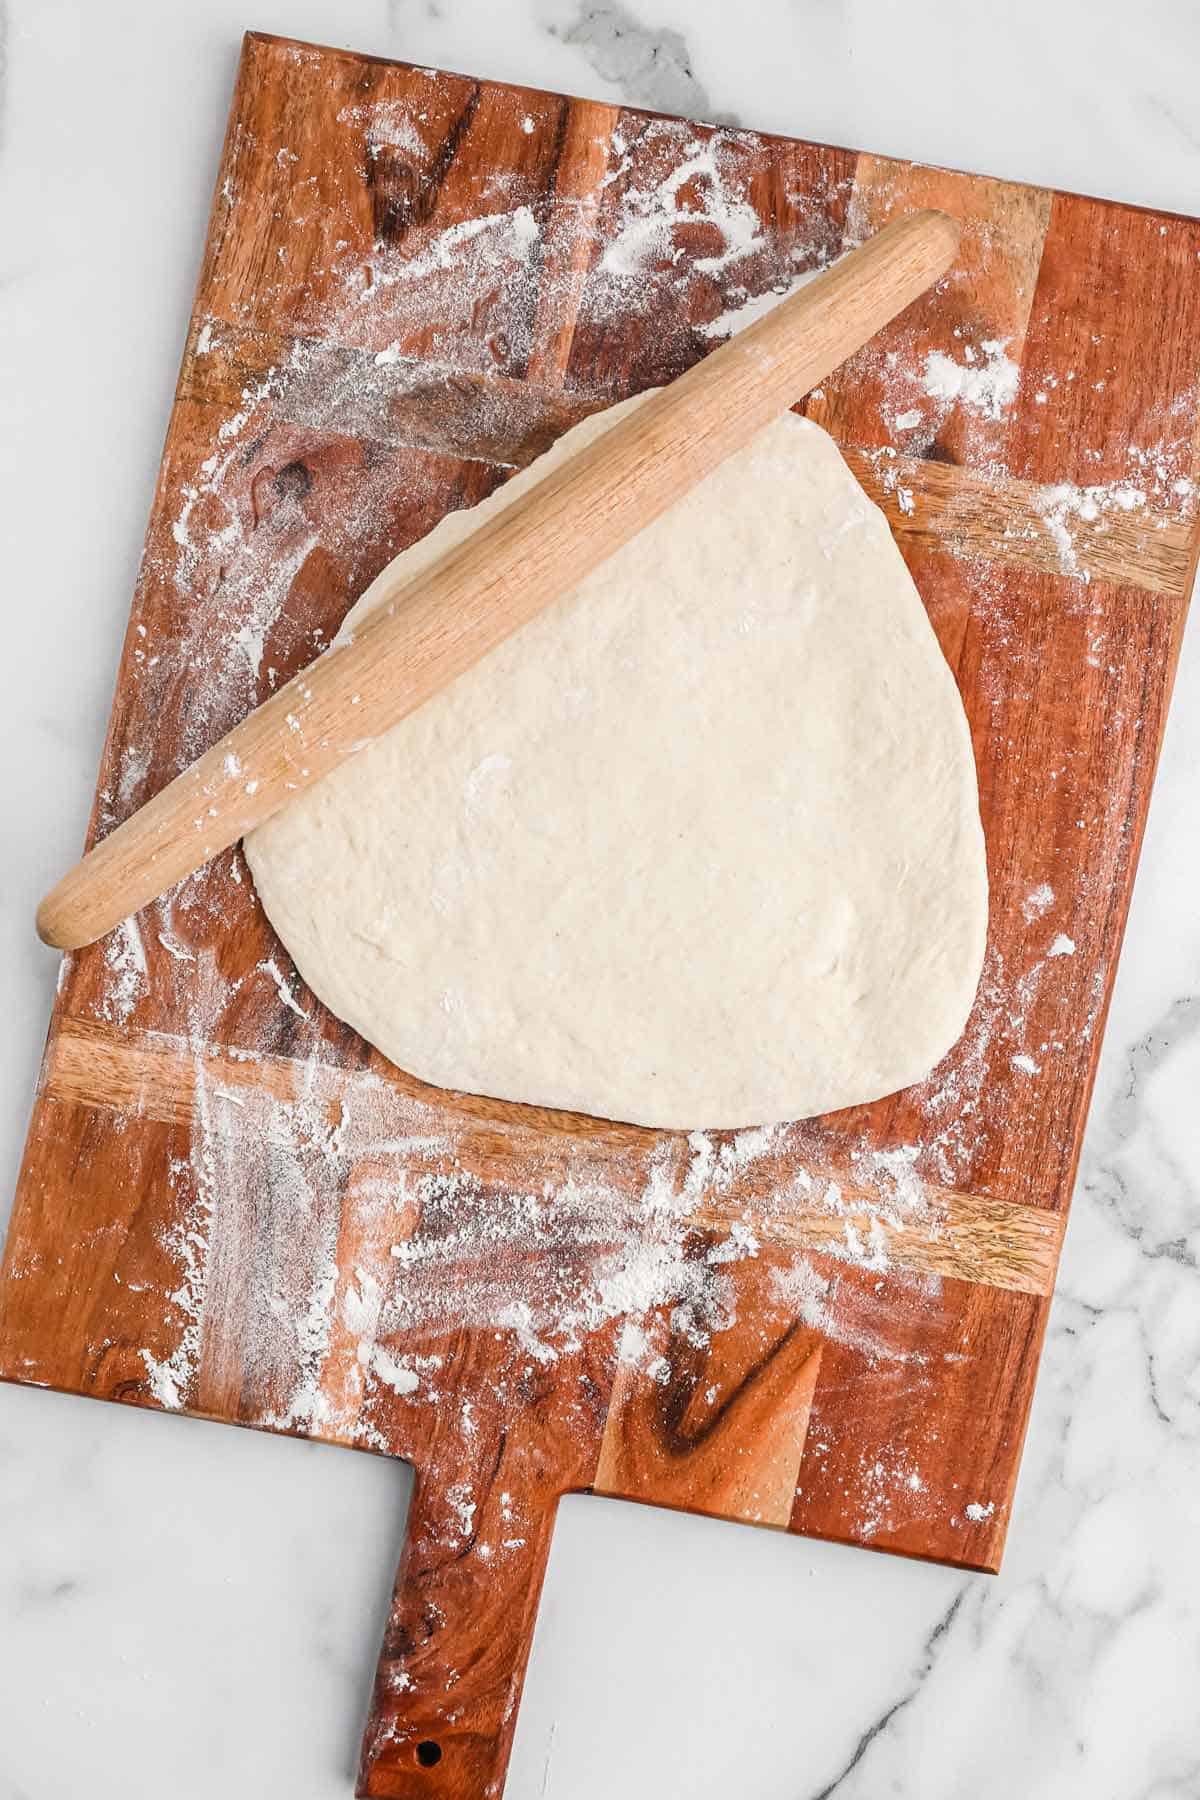 Pizza dough rolled out on a cutting board with rolling pin.